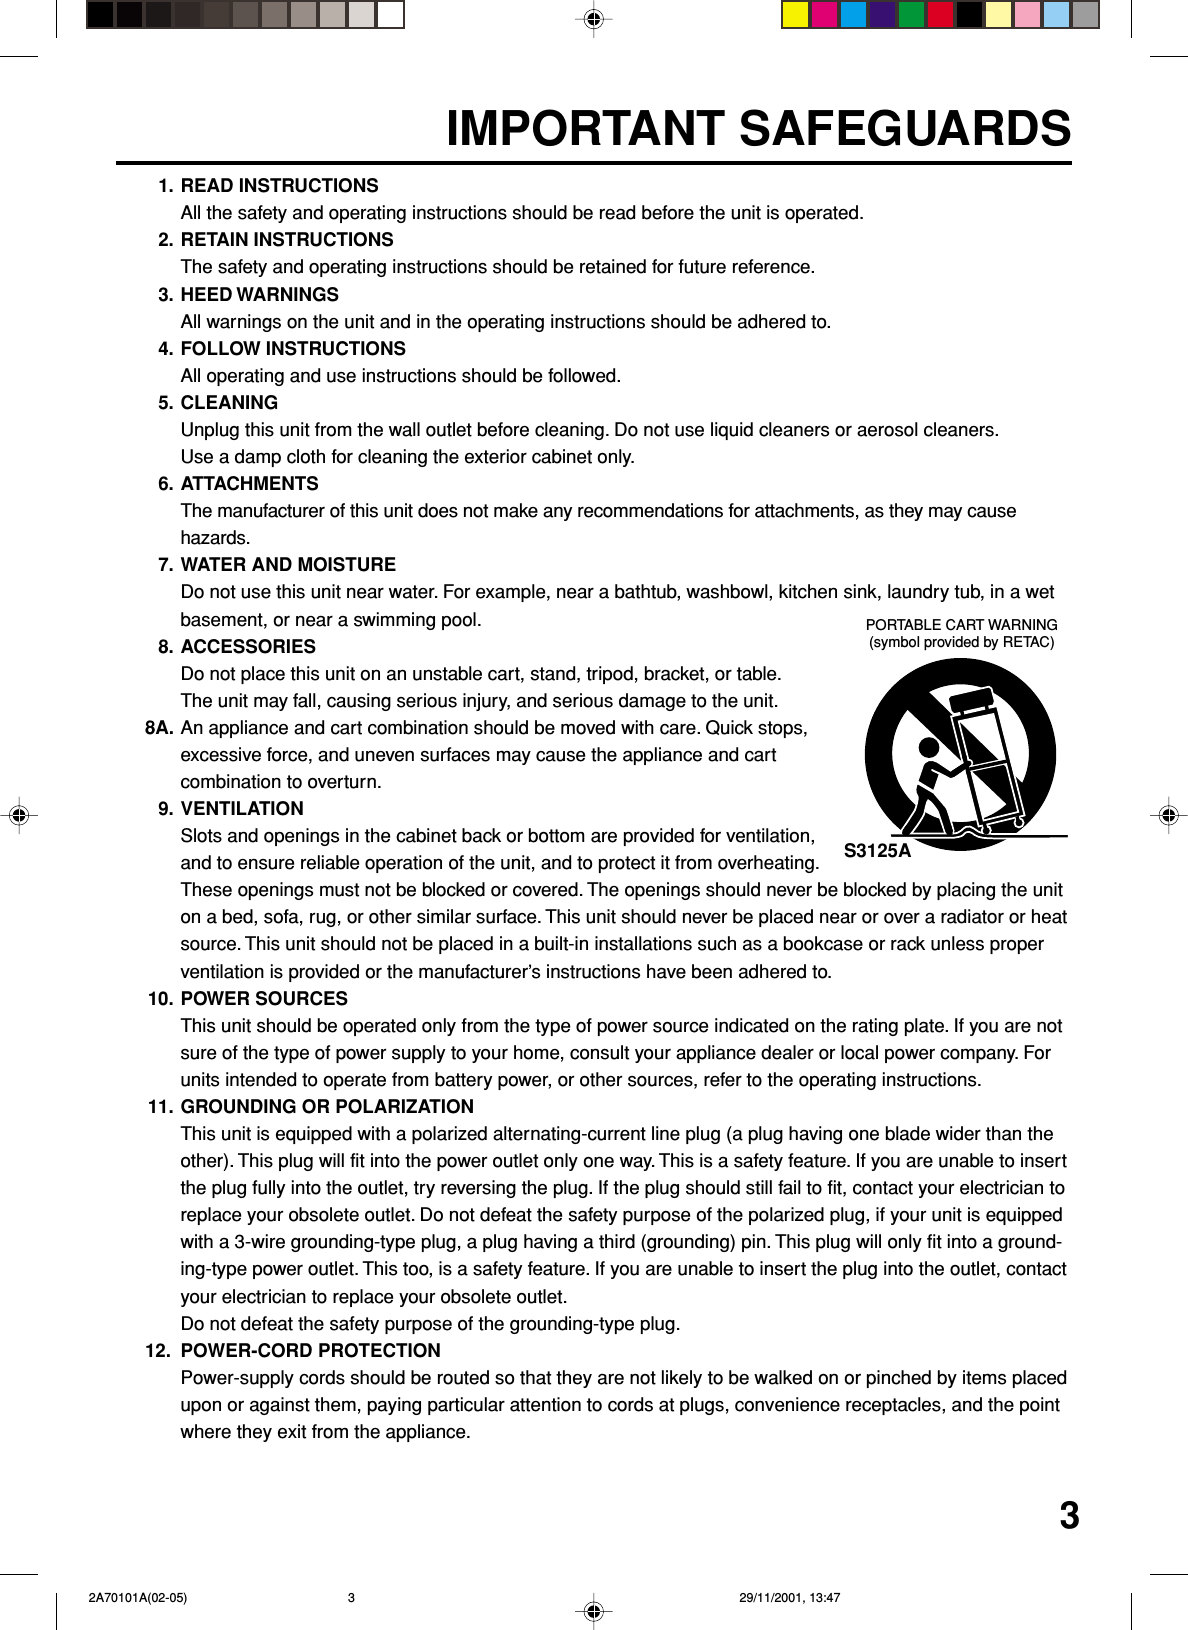 31. READ INSTRUCTIONSAll the safety and operating instructions should be read before the unit is operated.2. RETAIN INSTRUCTIONSThe safety and operating instructions should be retained for future reference.3. HEED WARNINGSAll warnings on the unit and in the operating instructions should be adhered to.4. FOLLOW INSTRUCTIONSAll operating and use instructions should be followed.5. CLEANINGUnplug this unit from the wall outlet before cleaning. Do not use liquid cleaners or aerosol cleaners.Use a damp cloth for cleaning the exterior cabinet only.6. ATTACHMENTSThe manufacturer of this unit does not make any recommendations for attachments, as they may causehazards.7. WATER AND MOISTUREDo not use this unit near water. For example, near a bathtub, washbowl, kitchen sink, laundry tub, in a wetbasement, or near a swimming pool.8. ACCESSORIESDo not place this unit on an unstable cart, stand, tripod, bracket, or table.The unit may fall, causing serious injury, and serious damage to the unit.8A. An appliance and cart combination should be moved with care. Quick stops,excessive force, and uneven surfaces may cause the appliance and cartcombination to overturn.9. VENTILATIONSlots and openings in the cabinet back or bottom are provided for ventilation,and to ensure reliable operation of the unit, and to protect it from overheating.These openings must not be blocked or covered. The openings should never be blocked by placing the uniton a bed, sofa, rug, or other similar surface. This unit should never be placed near or over a radiator or heatsource. This unit should not be placed in a built-in installations such as a bookcase or rack unless properventilation is provided or the manufacturer’s instructions have been adhered to.10. POWER SOURCESThis unit should be operated only from the type of power source indicated on the rating plate. If you are notsure of the type of power supply to your home, consult your appliance dealer or local power company. Forunits intended to operate from battery power, or other sources, refer to the operating instructions.11. GROUNDING OR POLARIZATIONThis unit is equipped with a polarized alternating-current line plug (a plug having one blade wider than theother). This plug will fit into the power outlet only one way. This is a safety feature. If you are unable to insertthe plug fully into the outlet, try reversing the plug. If the plug should still fail to fit, contact your electrician toreplace your obsolete outlet. Do not defeat the safety purpose of the polarized plug, if your unit is equippedwith a 3-wire grounding-type plug, a plug having a third (grounding) pin. This plug will only fit into a ground-ing-type power outlet. This too, is a safety feature. If you are unable to insert the plug into the outlet, contactyour electrician to replace your obsolete outlet.Do not defeat the safety purpose of the grounding-type plug.12. POWER-CORD PROTECTIONPower-supply cords should be routed so that they are not likely to be walked on or pinched by items placedupon or against them, paying particular attention to cords at plugs, convenience receptacles, and the pointwhere they exit from the appliance.S3125APORTABLE CART WARNING(symbol provided by RETAC)IMPORTANT SAFEGUARDS 2A70101A(02-05) 29/11/2001, 13:473